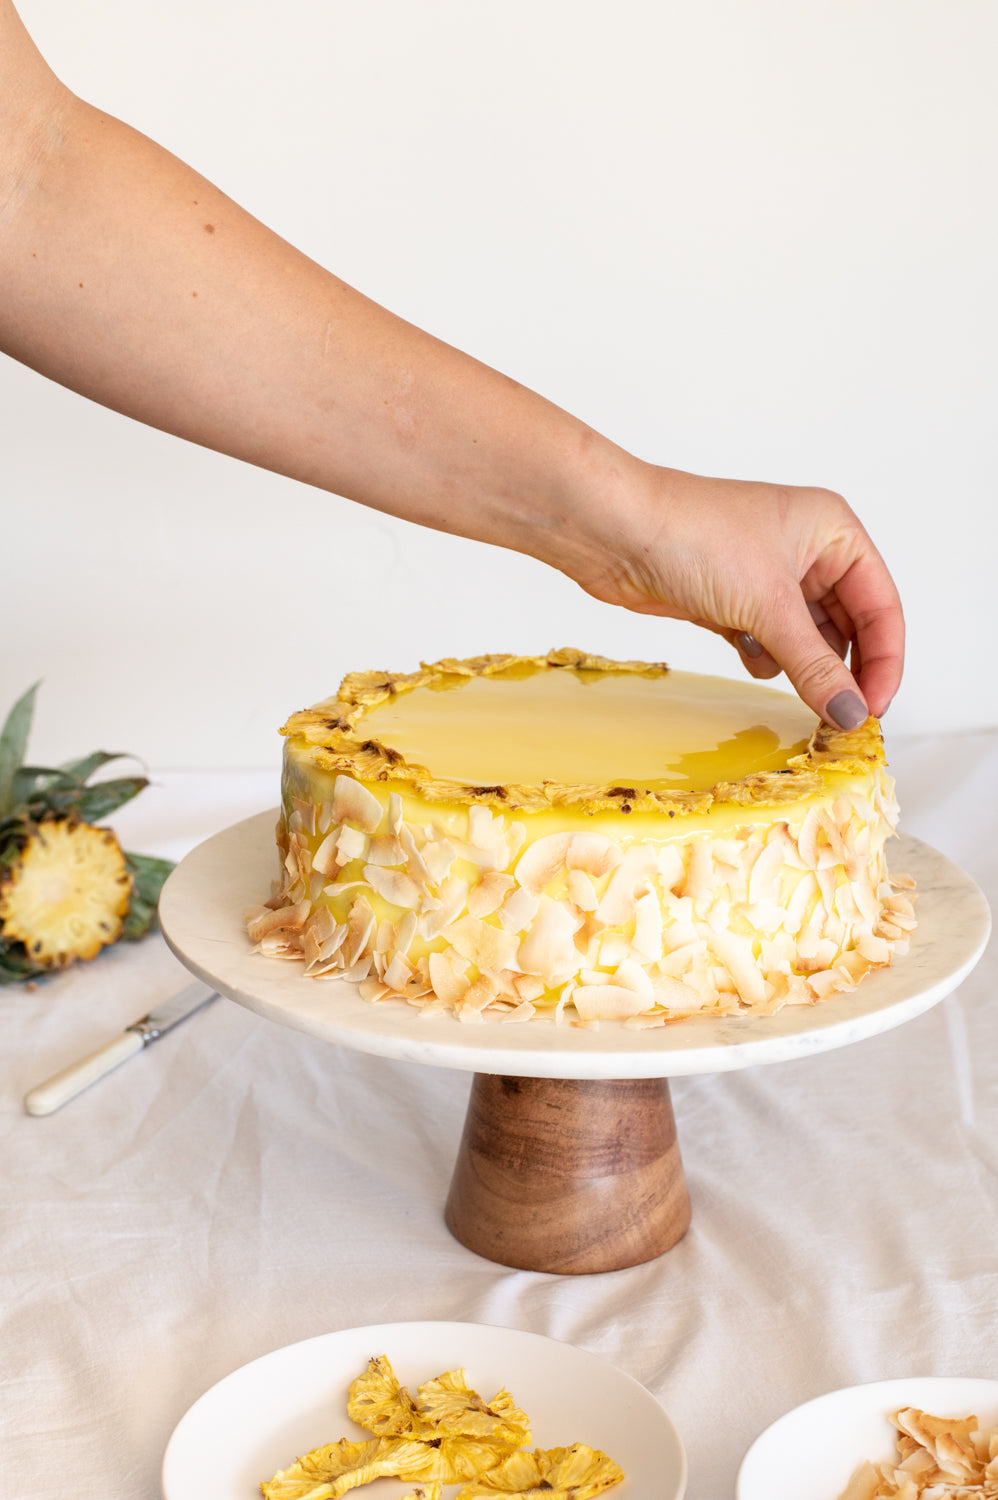 A yellow tropical cake garnished with pineapple and coconut